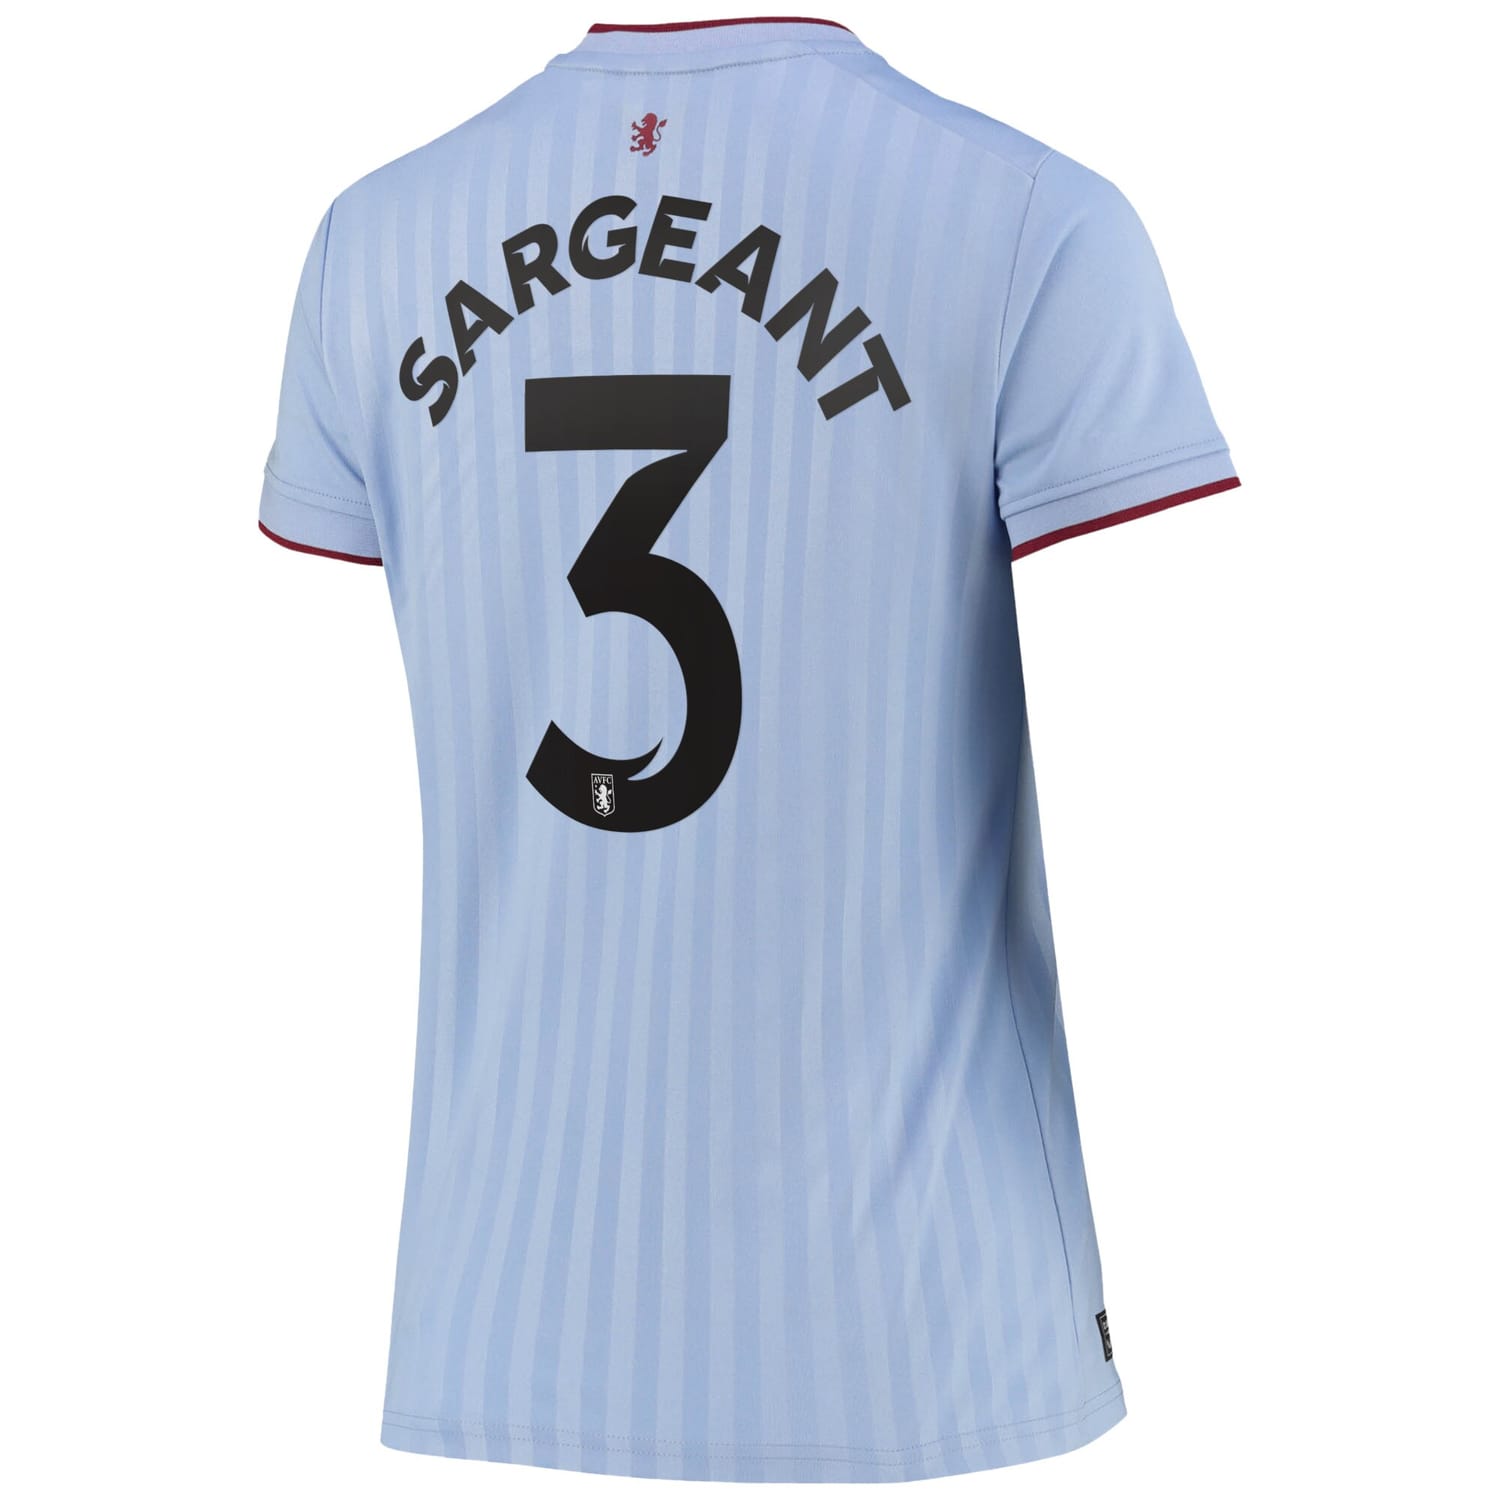 Premier League Aston Villa Away Cup Jersey Shirt 2022-23 player Meaghan Sargeant 3 printing for Women